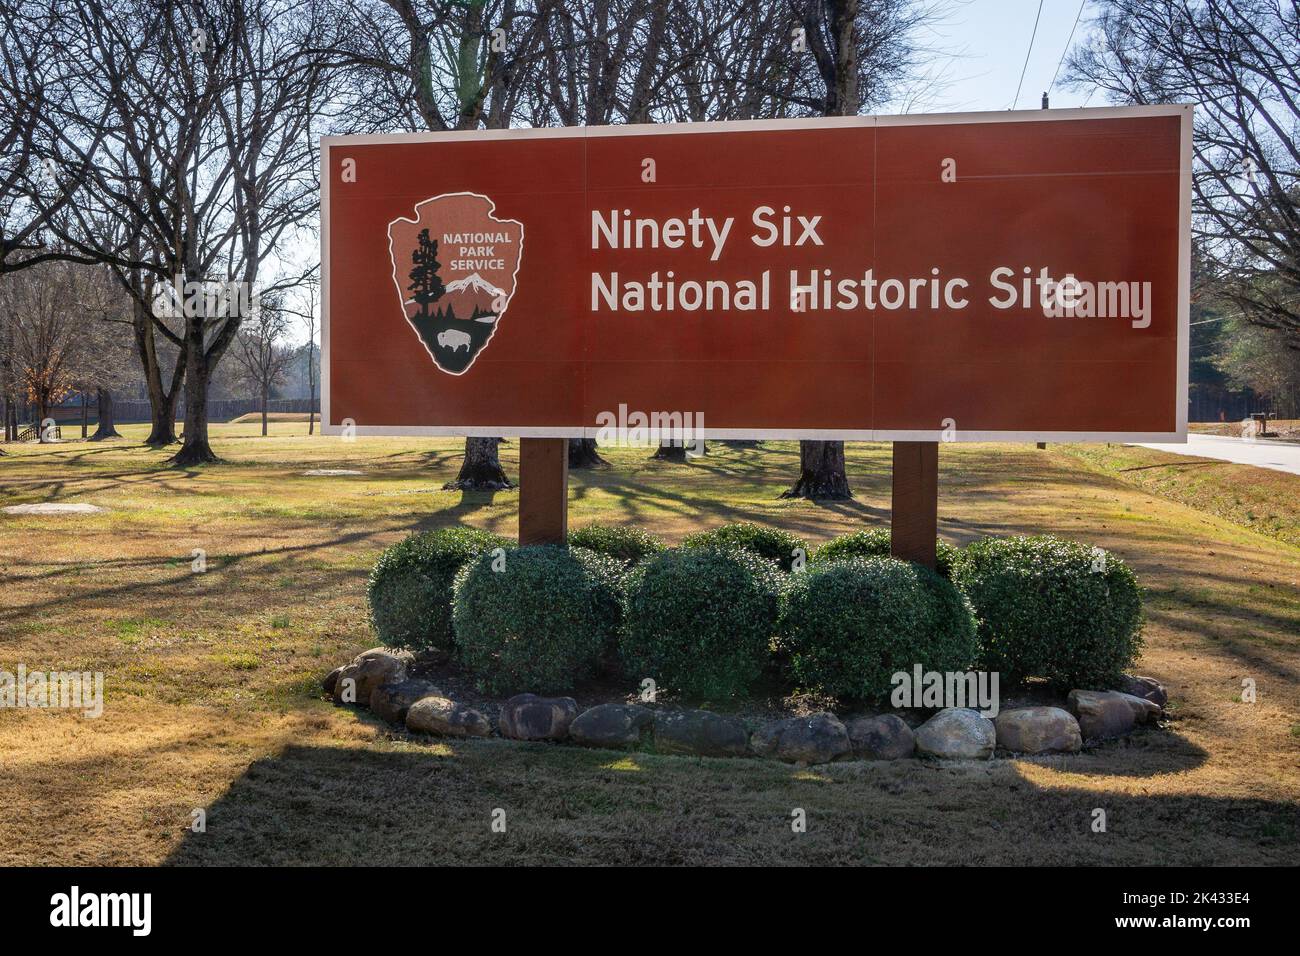 National Park Service sign for the Ninety Six National Historic Site in South Carolina Stock Photo